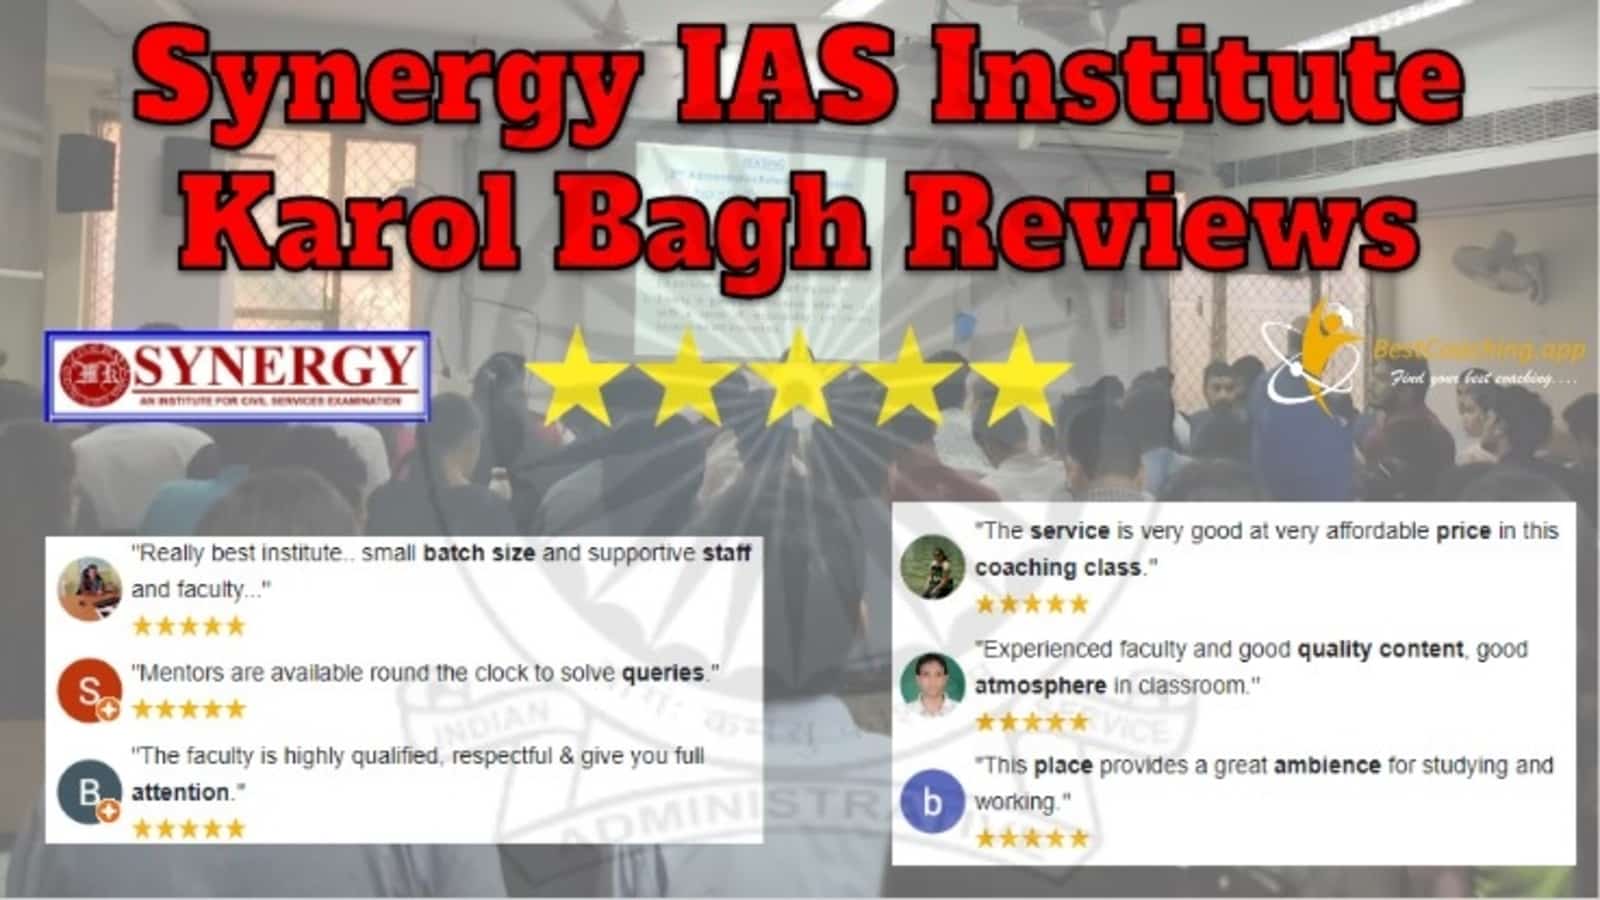 Synergy IAS Institute in Karol Bagh Reviews